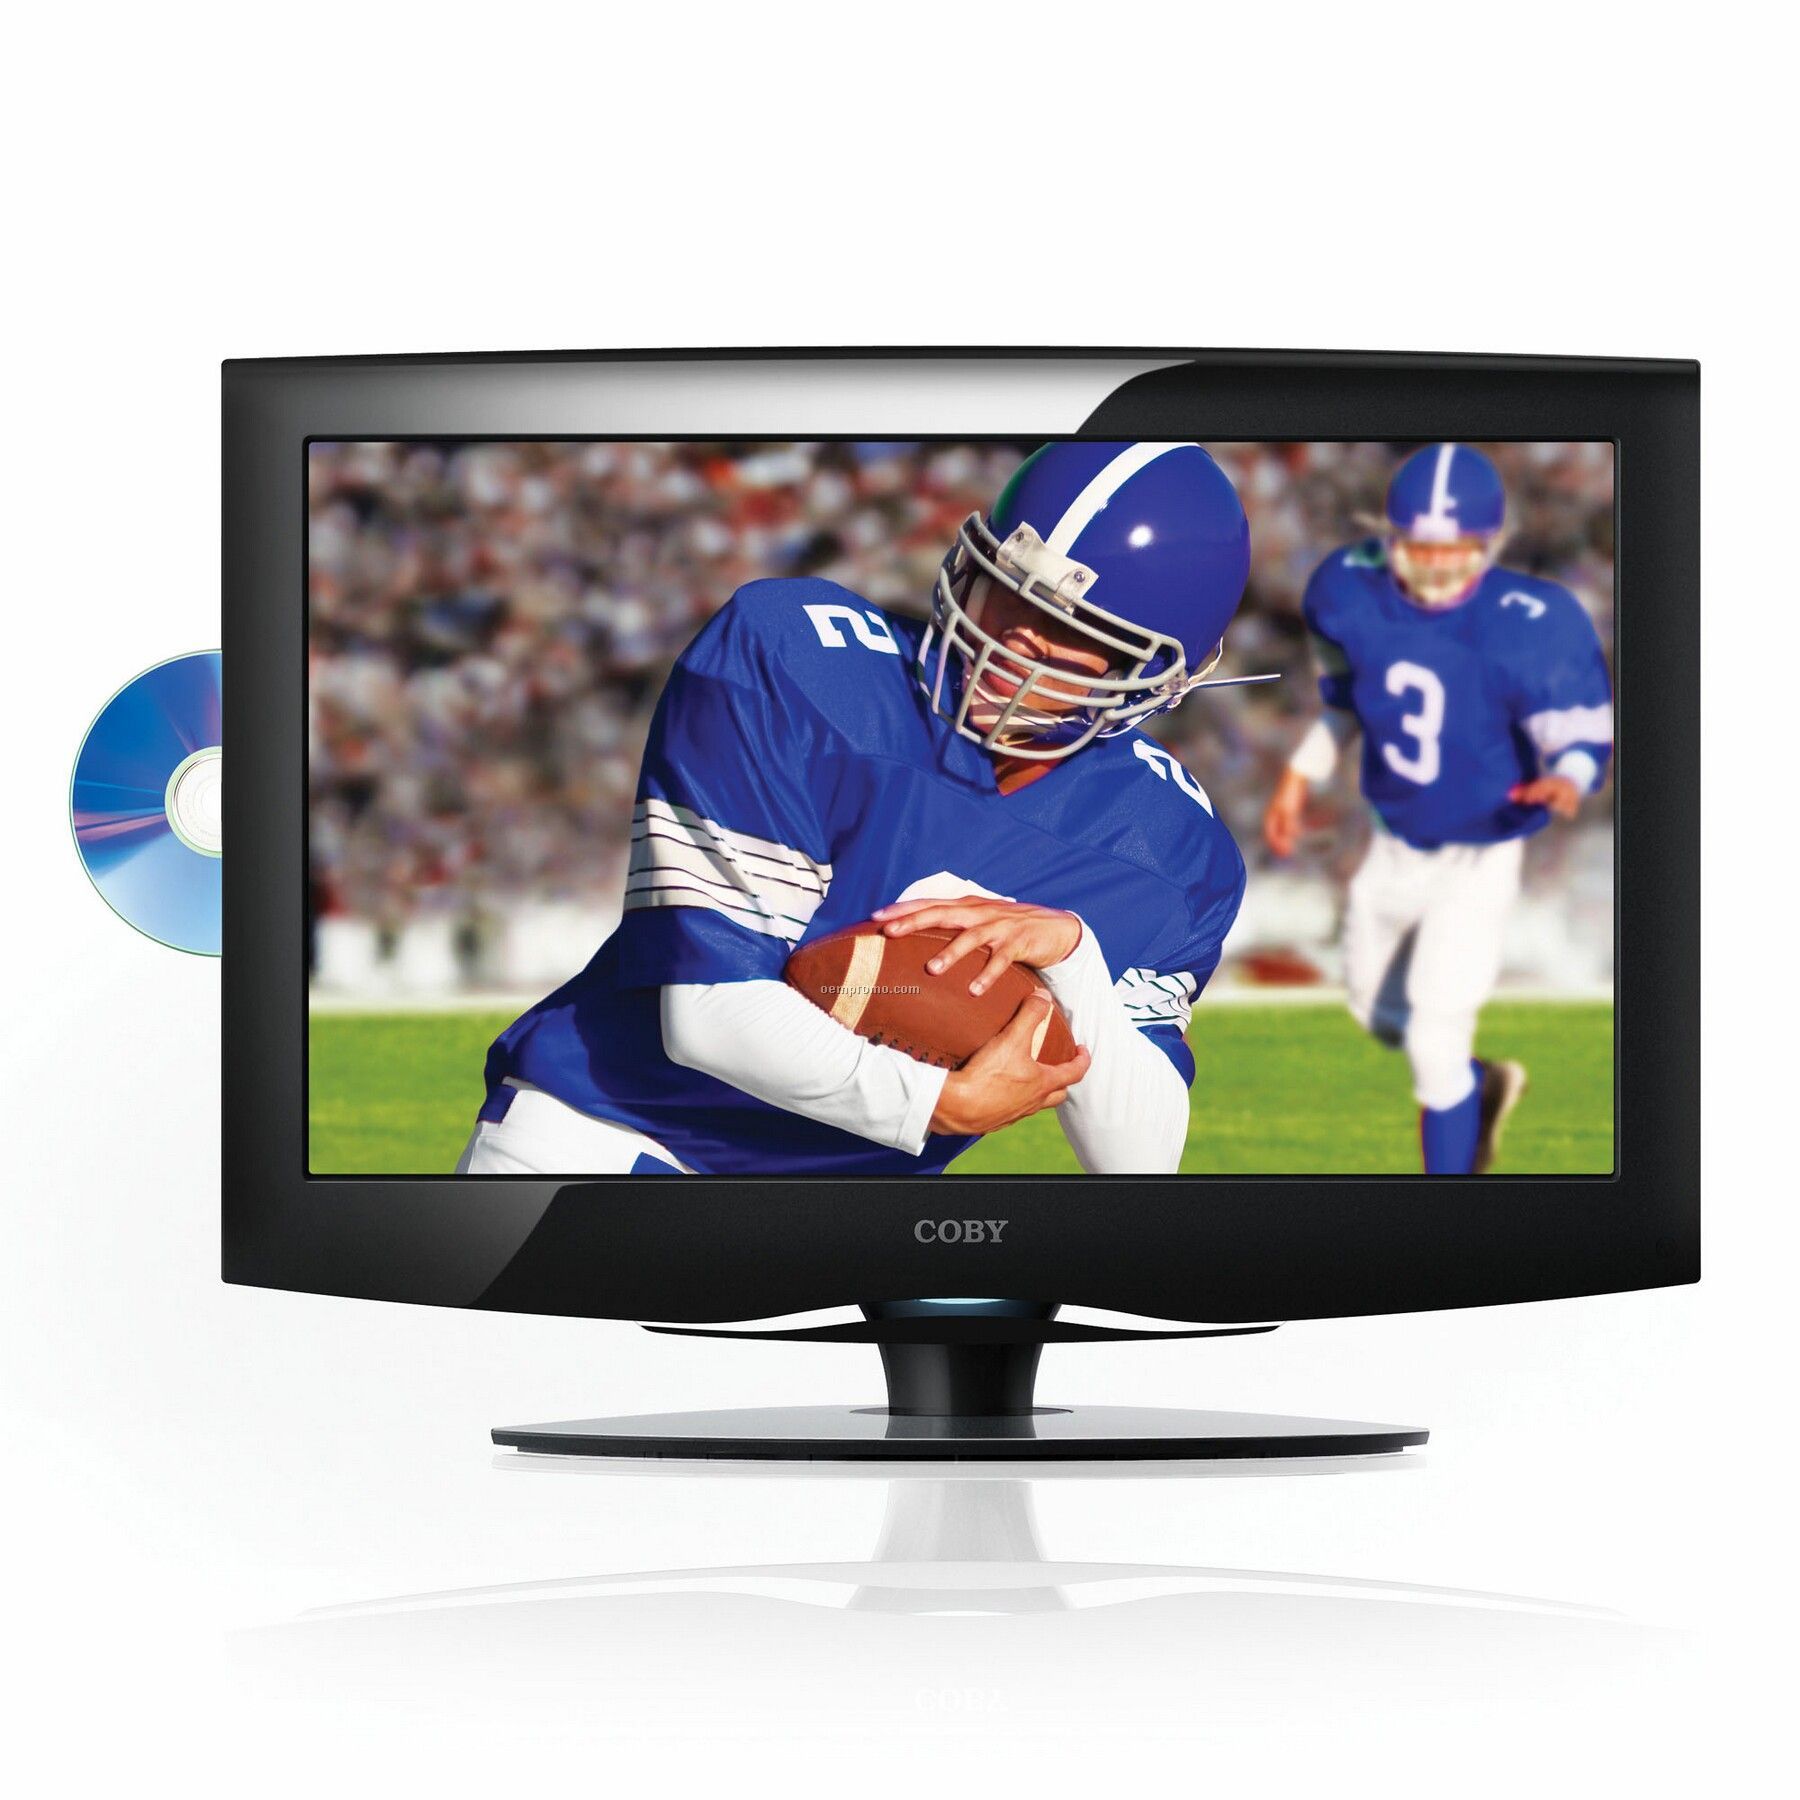 Coby 22" Widescreen Lcd/DVD Combo Hdtv